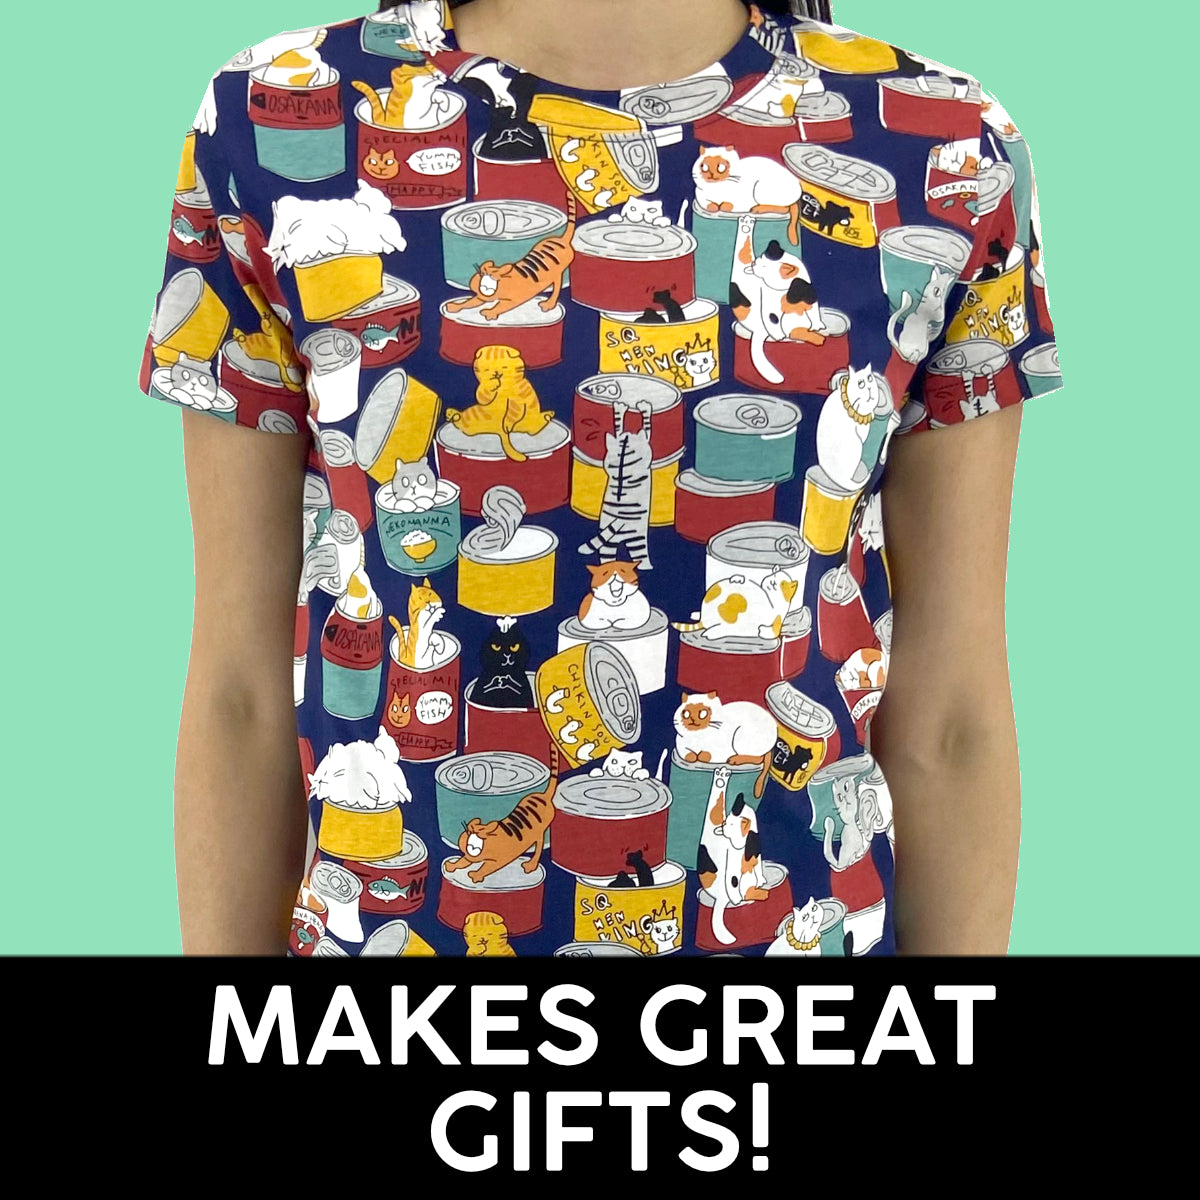 Women love cute & practical gifts. So why not get them THE comfiest graphic tee that'll let her move around with ease AND look great, no matter what she enjoys doing.